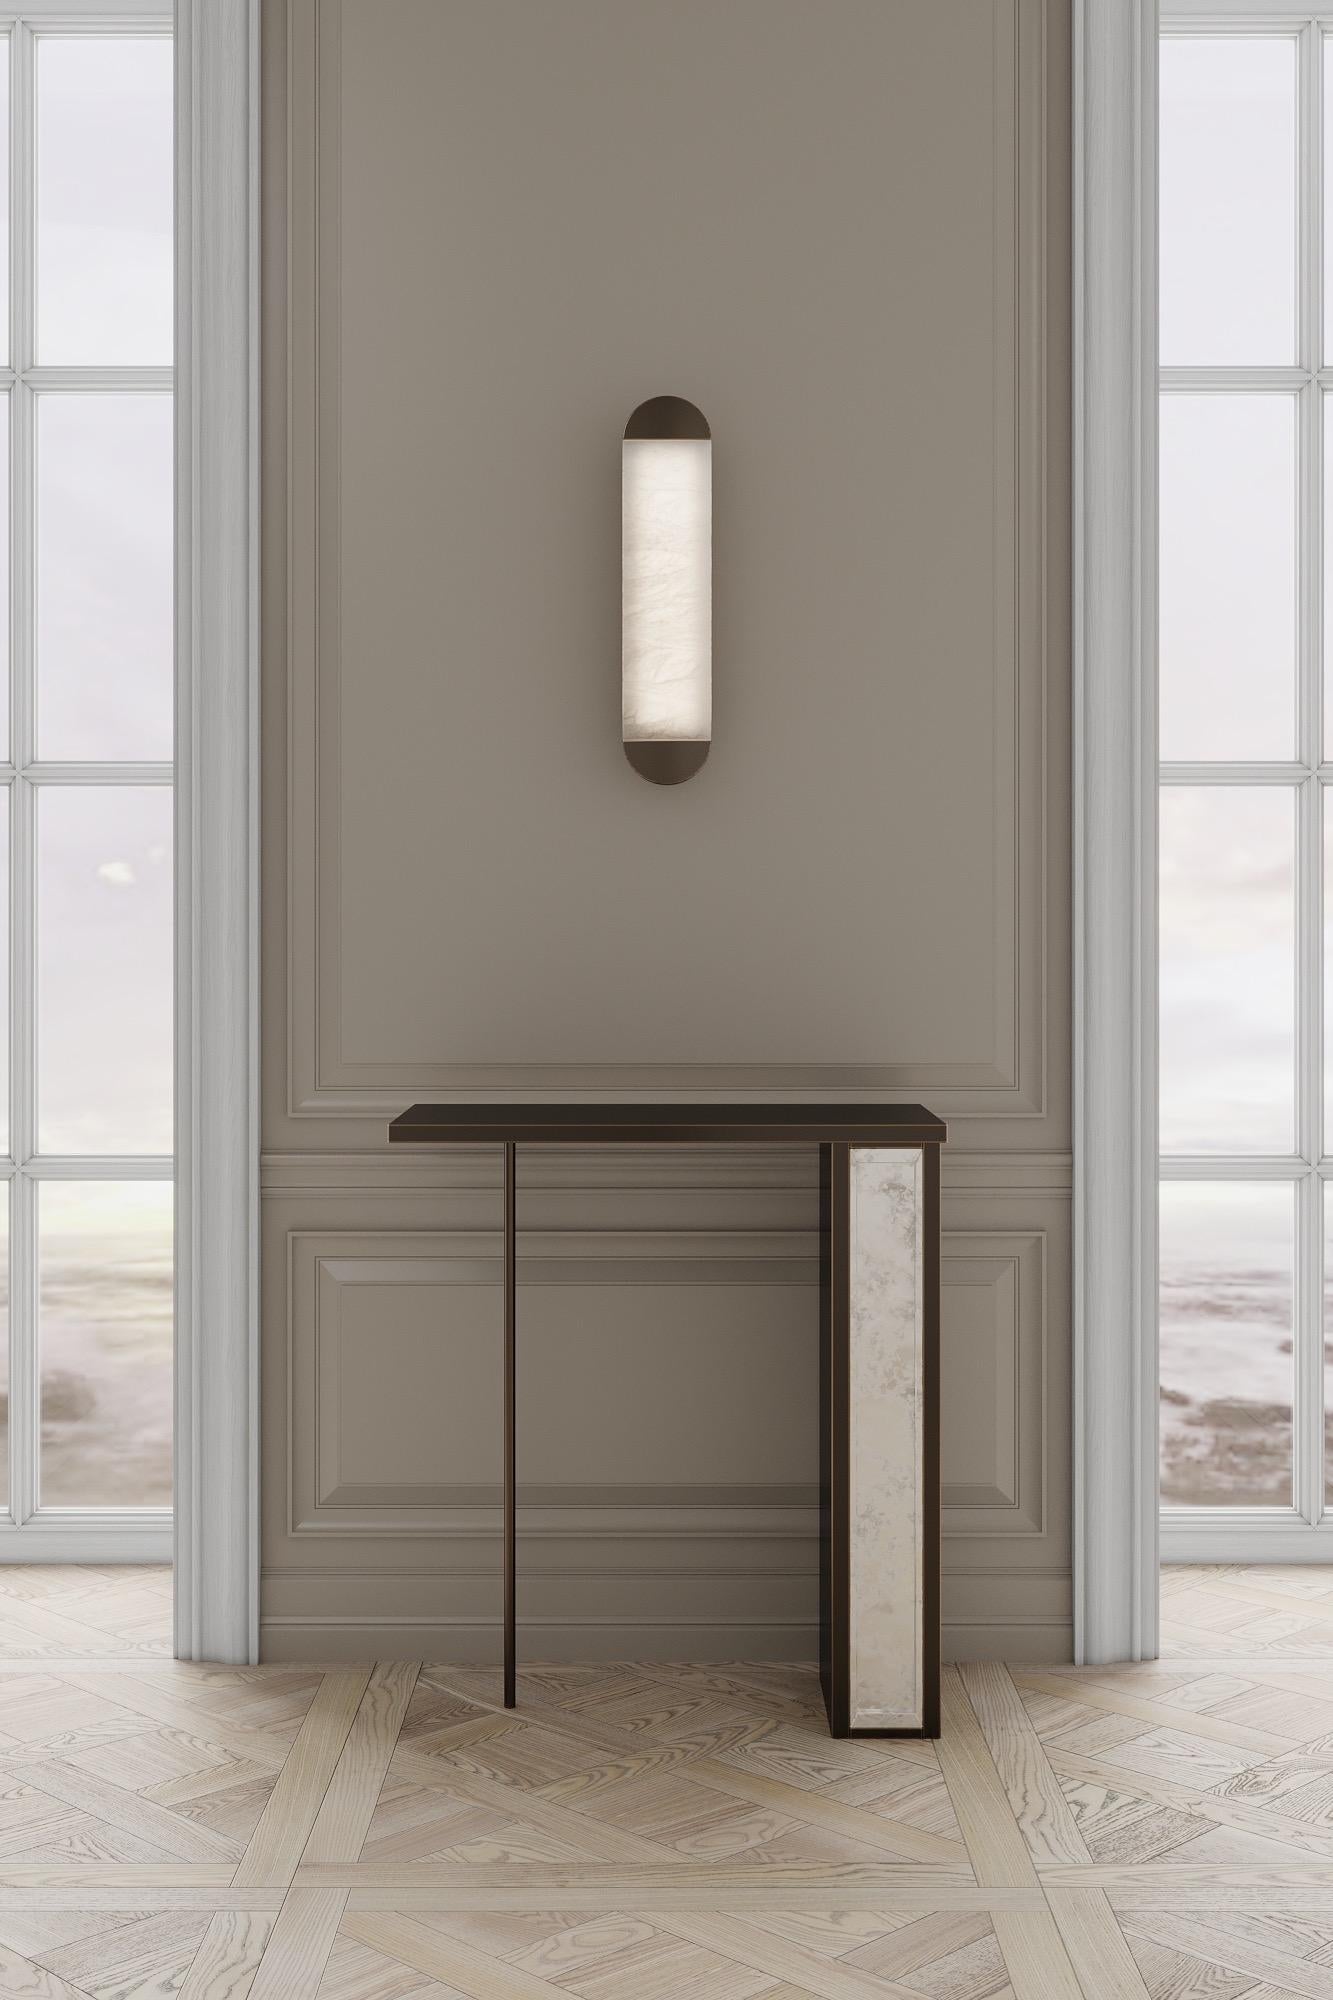 The silhouette console is designed by Emél & Browne in the Minimalist and contemporary style and custom made in Italy by skilled artisans. The delicate vertical elements of the silhouette console table resemble slender figures on the horizon against